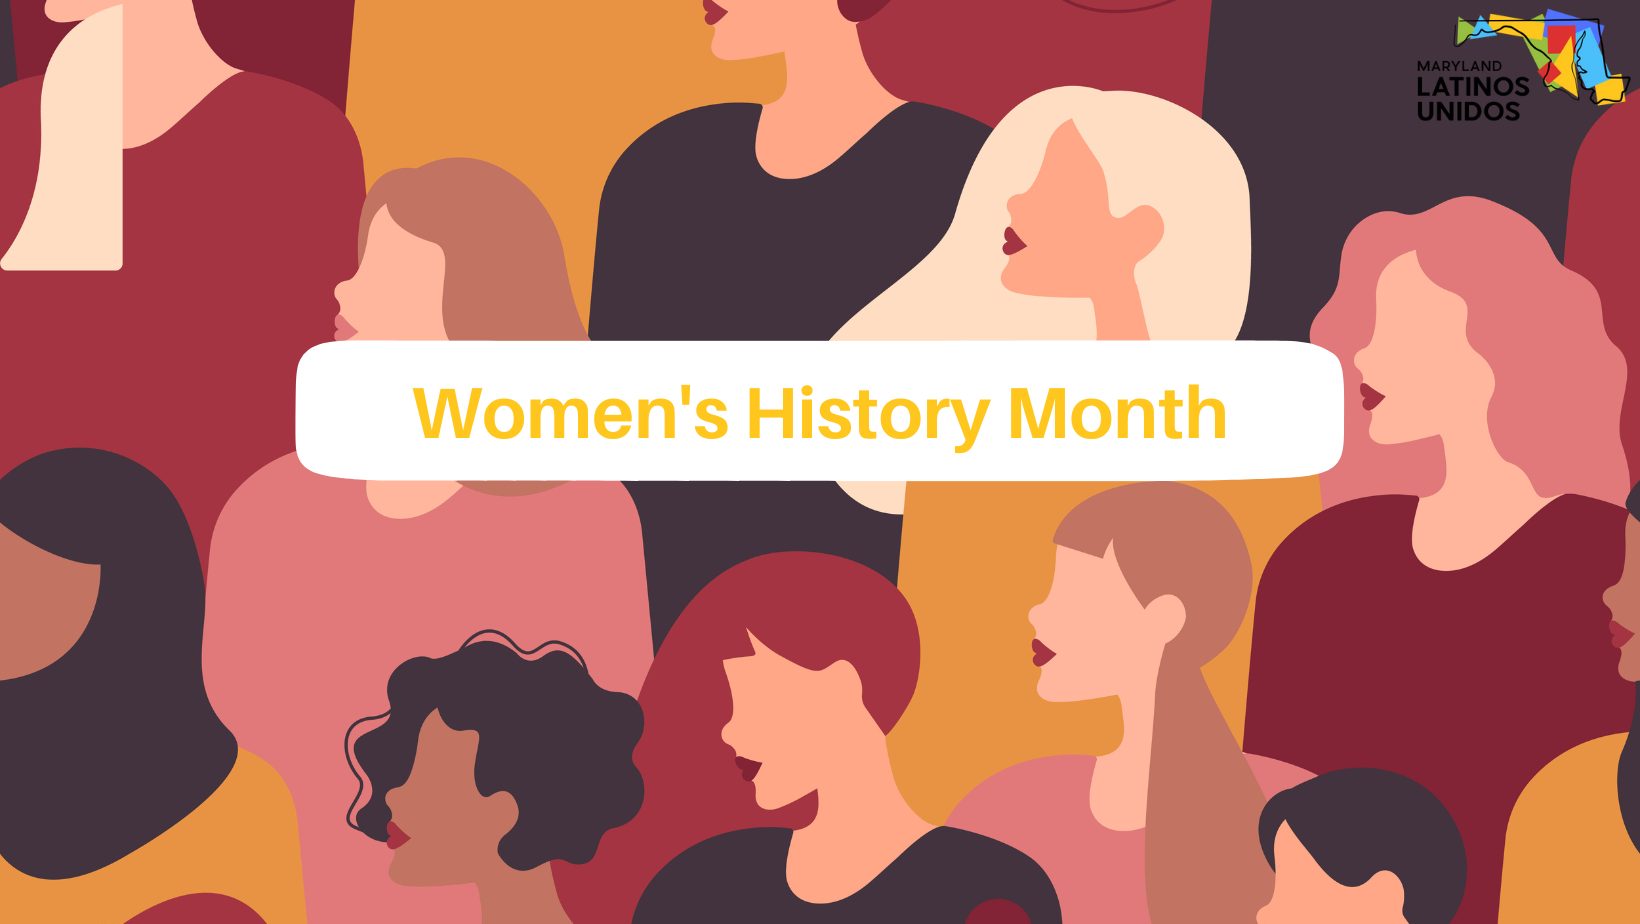 Women's history month banner